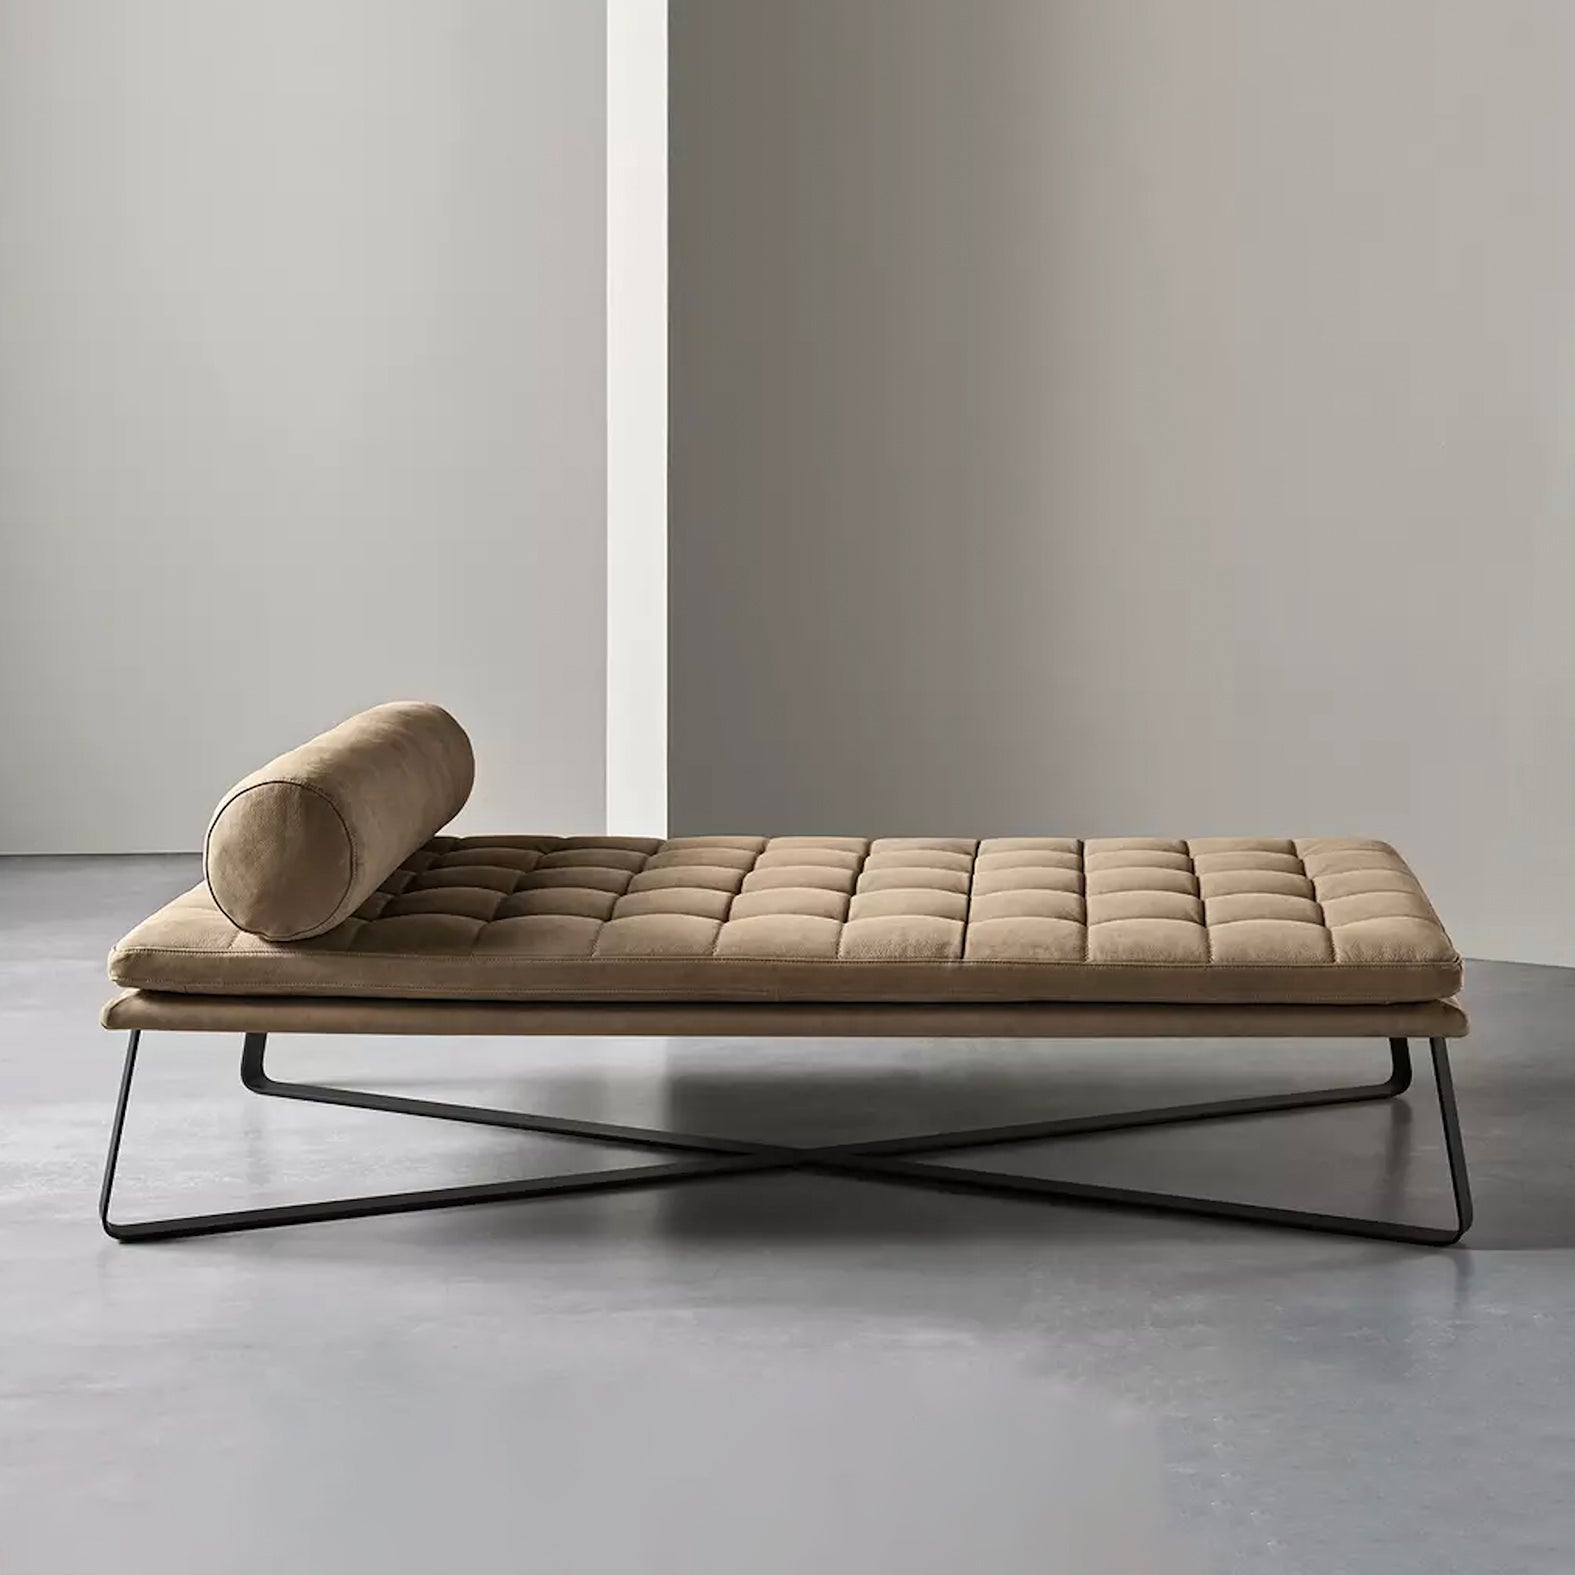 Lolyta Chaise Lounge